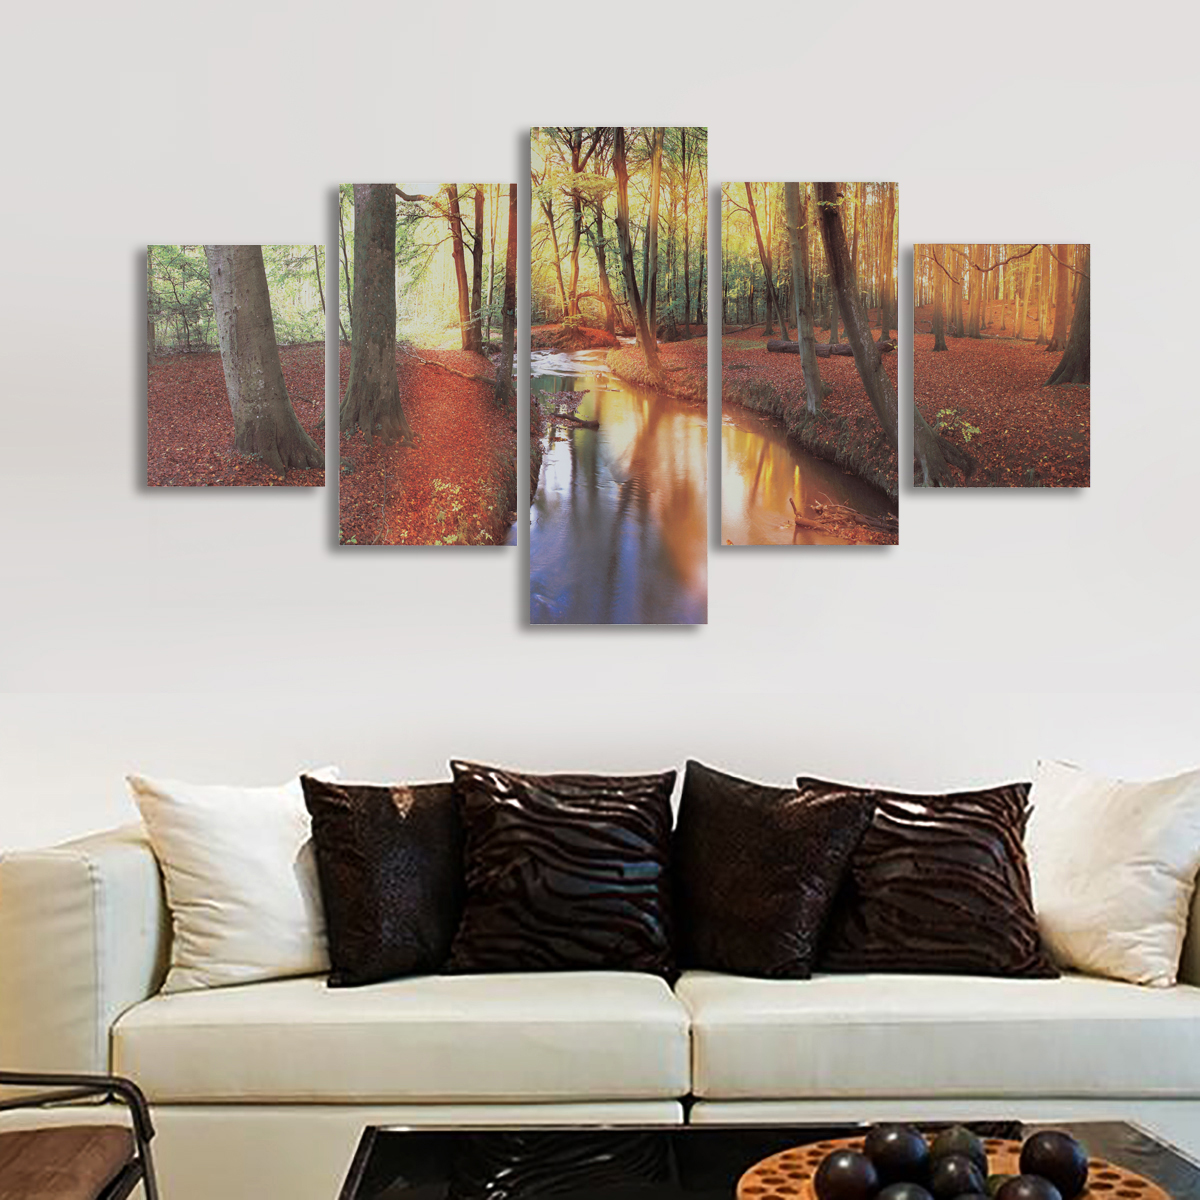 5Pcs-Modern-Autumn-Forest-Canvas-Print-Paintings-Poster-Wall-Art-Picture-Home-Decor-Unframed-1538687-2